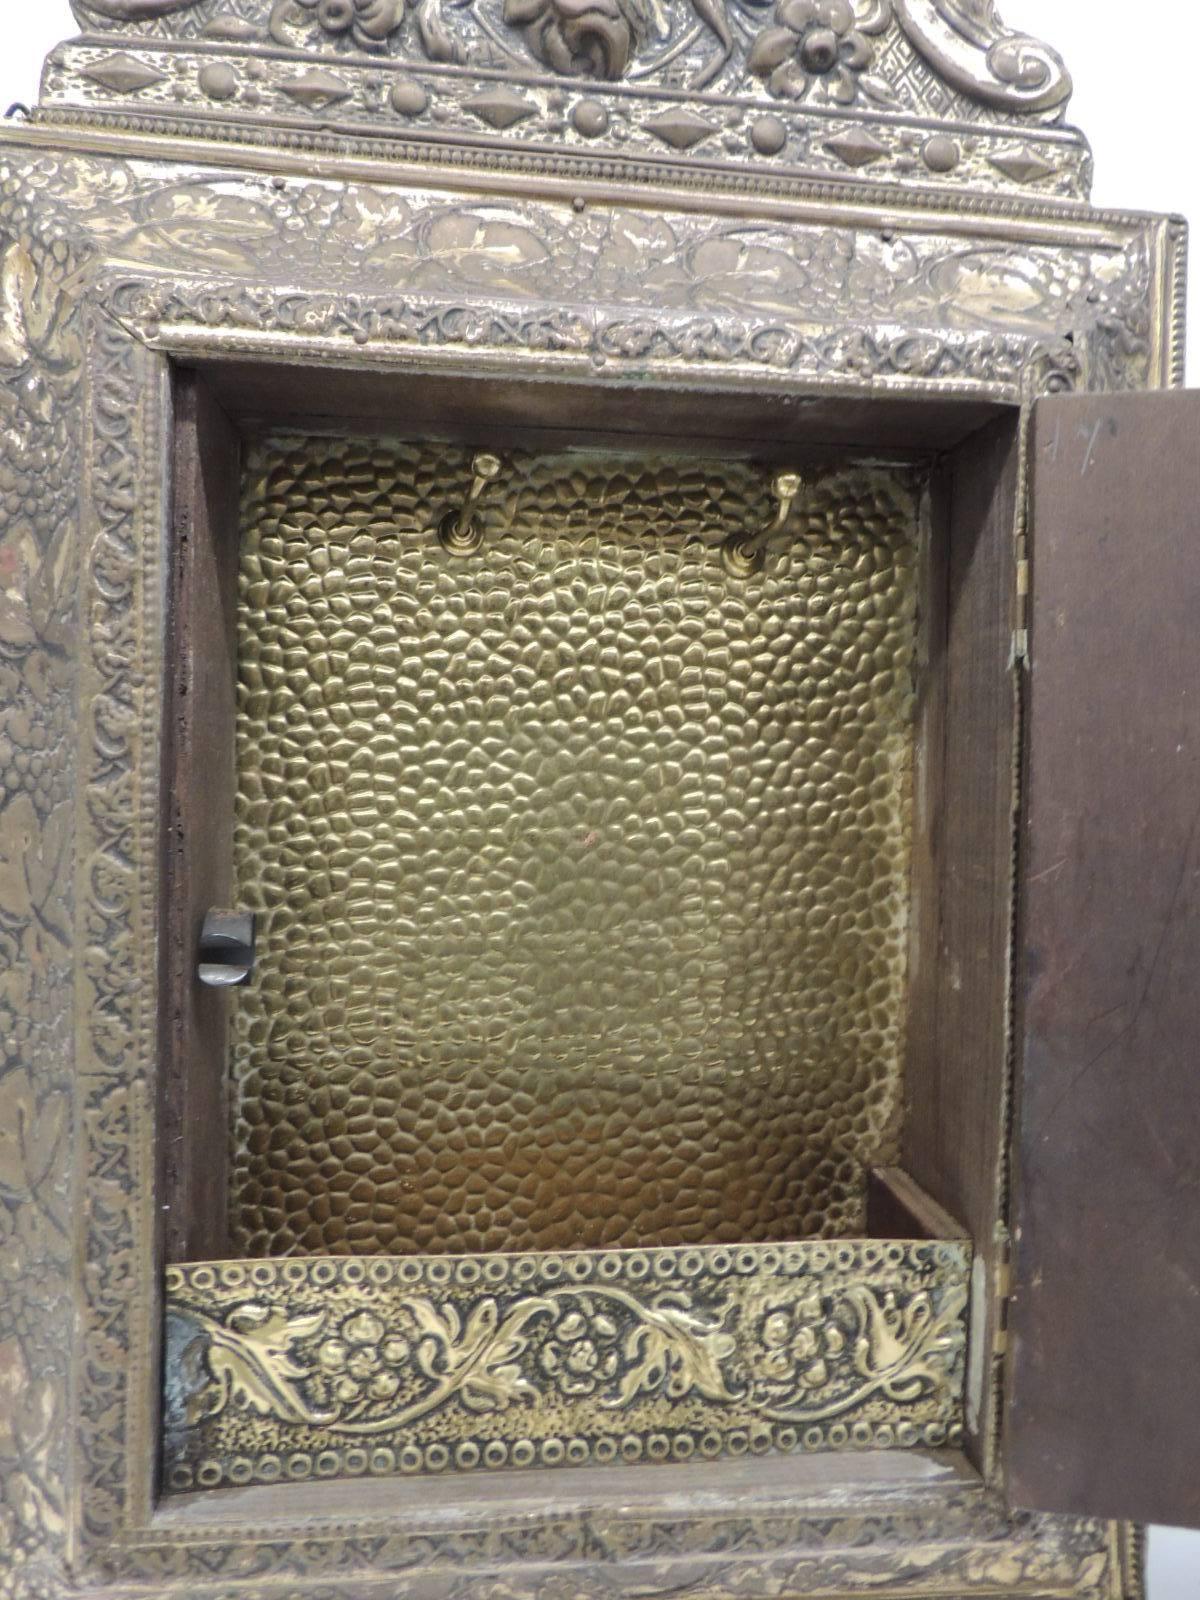 Hand-Crafted CLOSE OUT SALE: Antique Brass Vanity Reliquary with Mirrored Door & Coat Brushes